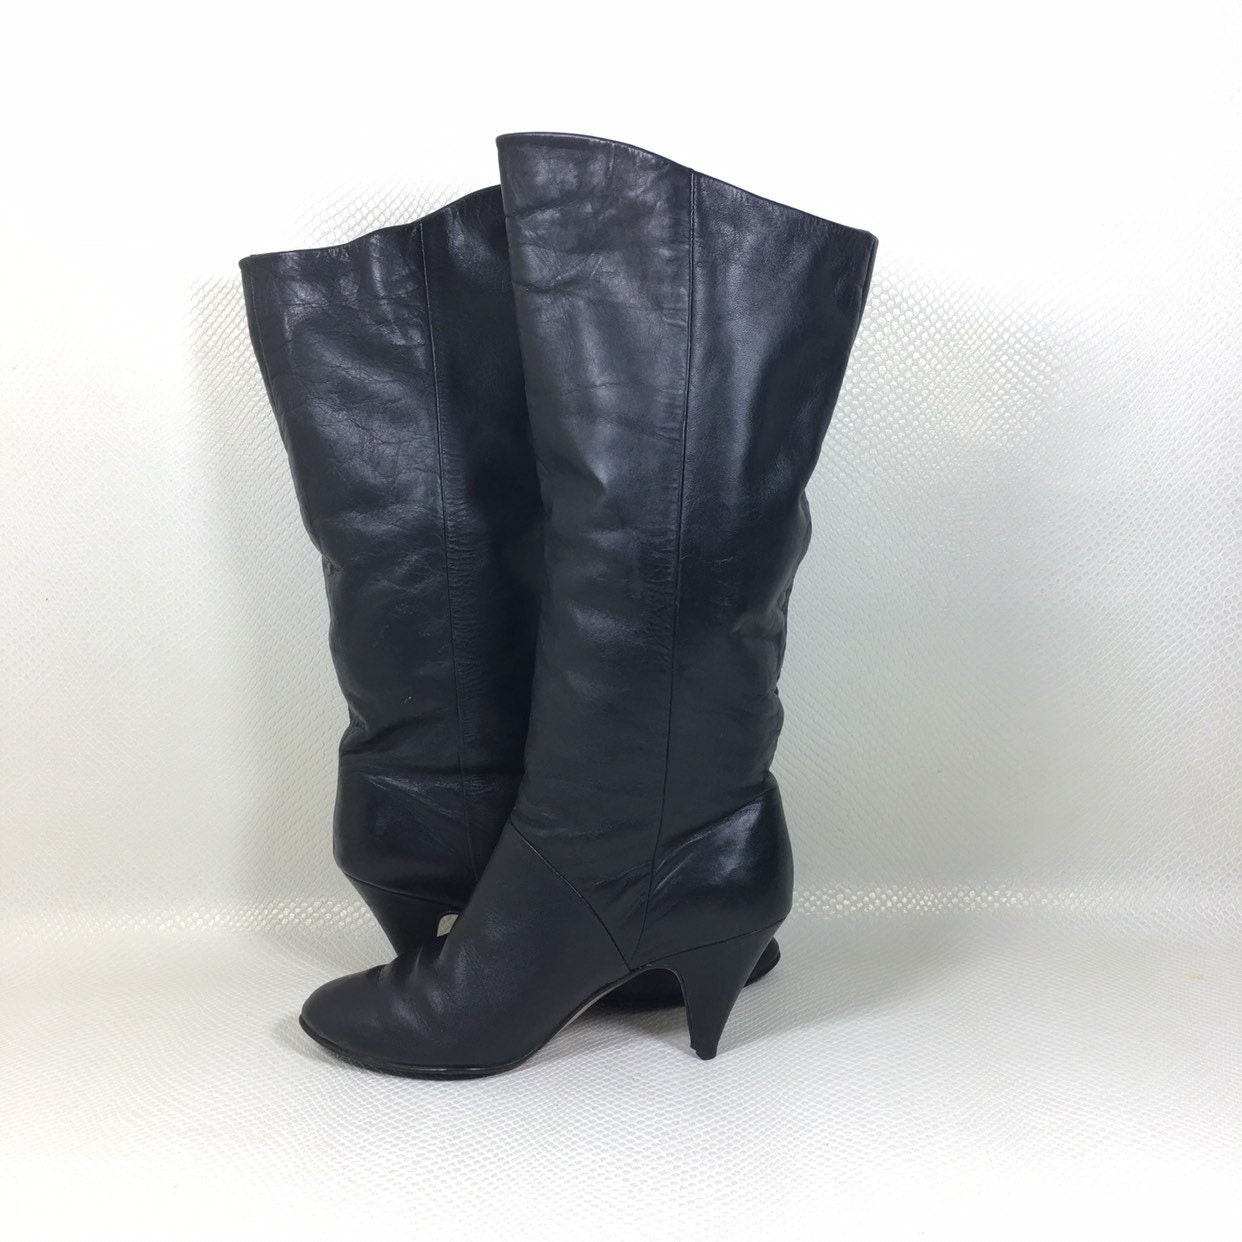 80s Vintage Round Toe Cone Heel Soft Black Leather Knee High Boots 7 ...